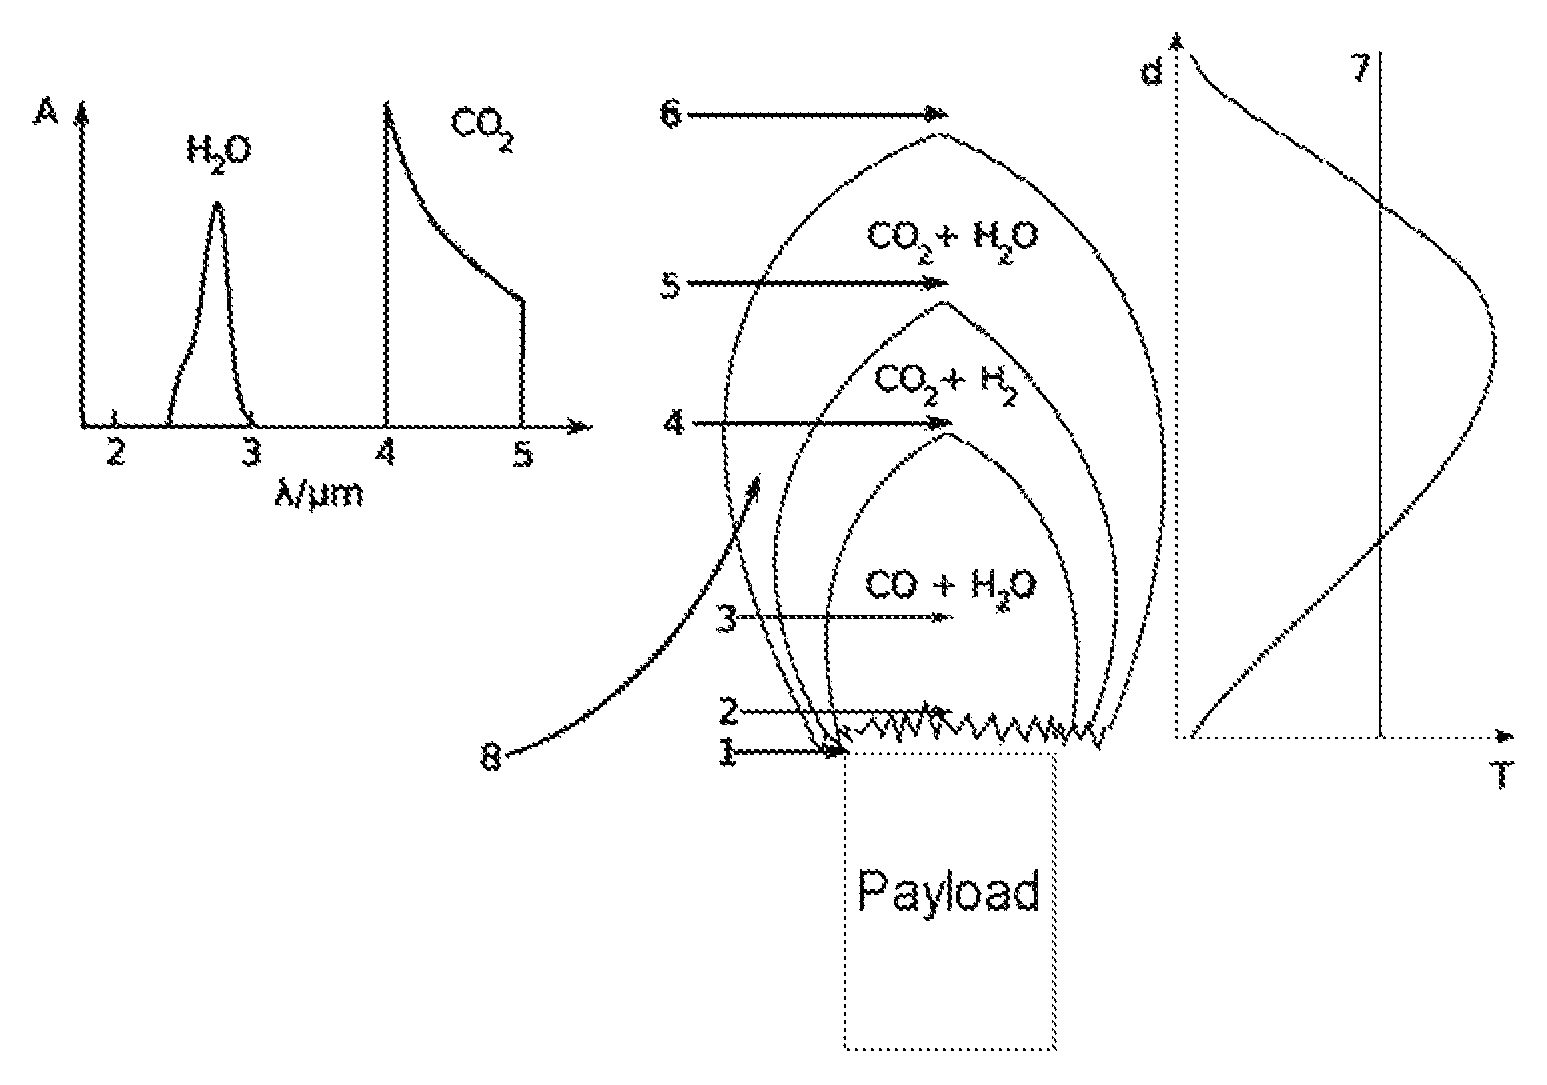 Active composition for a decoy which radiates spectrally on combustion of the active composition, containing an additive